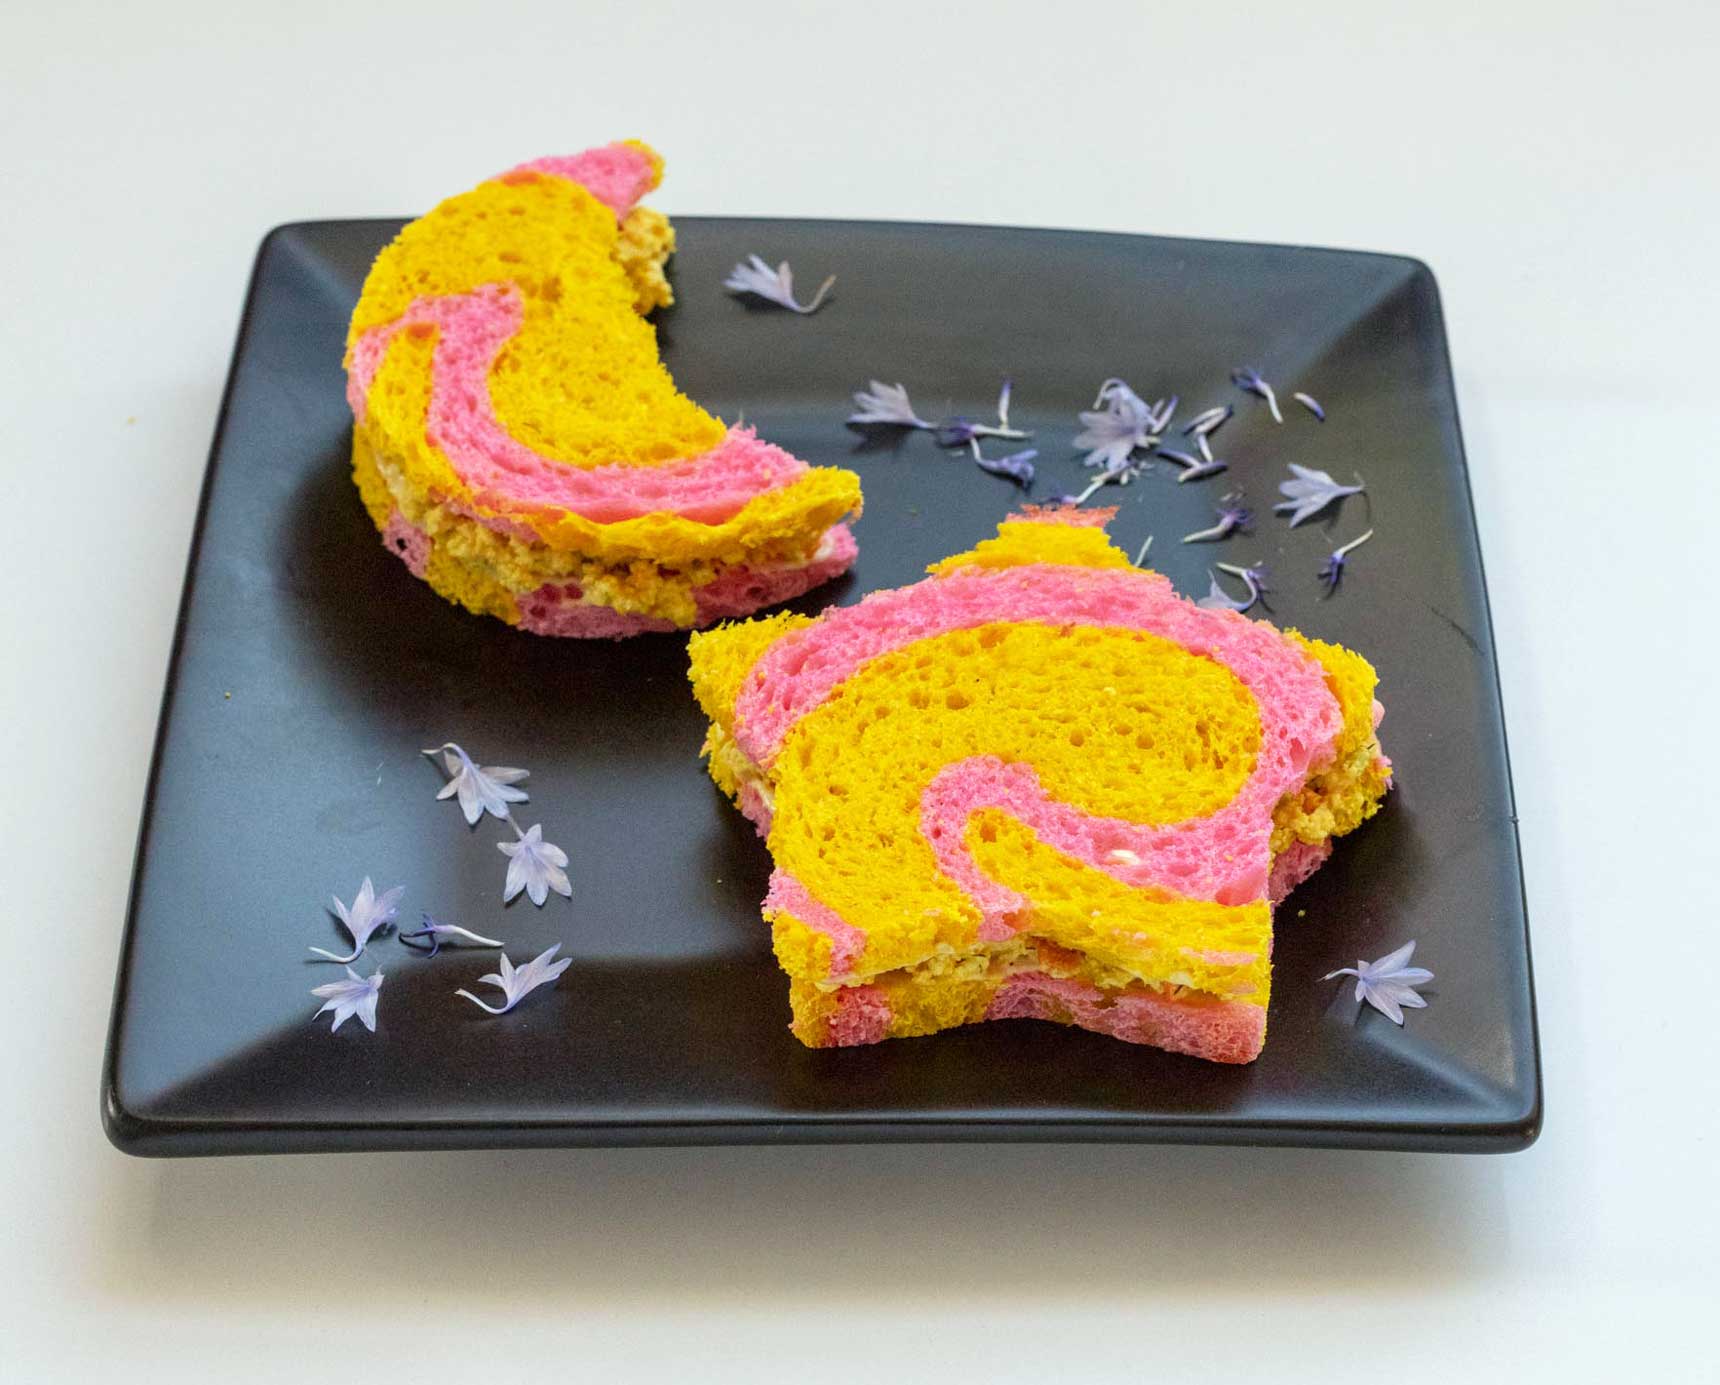 moon and star eggless salad tea sandwiches on pink and yellow swirl bread